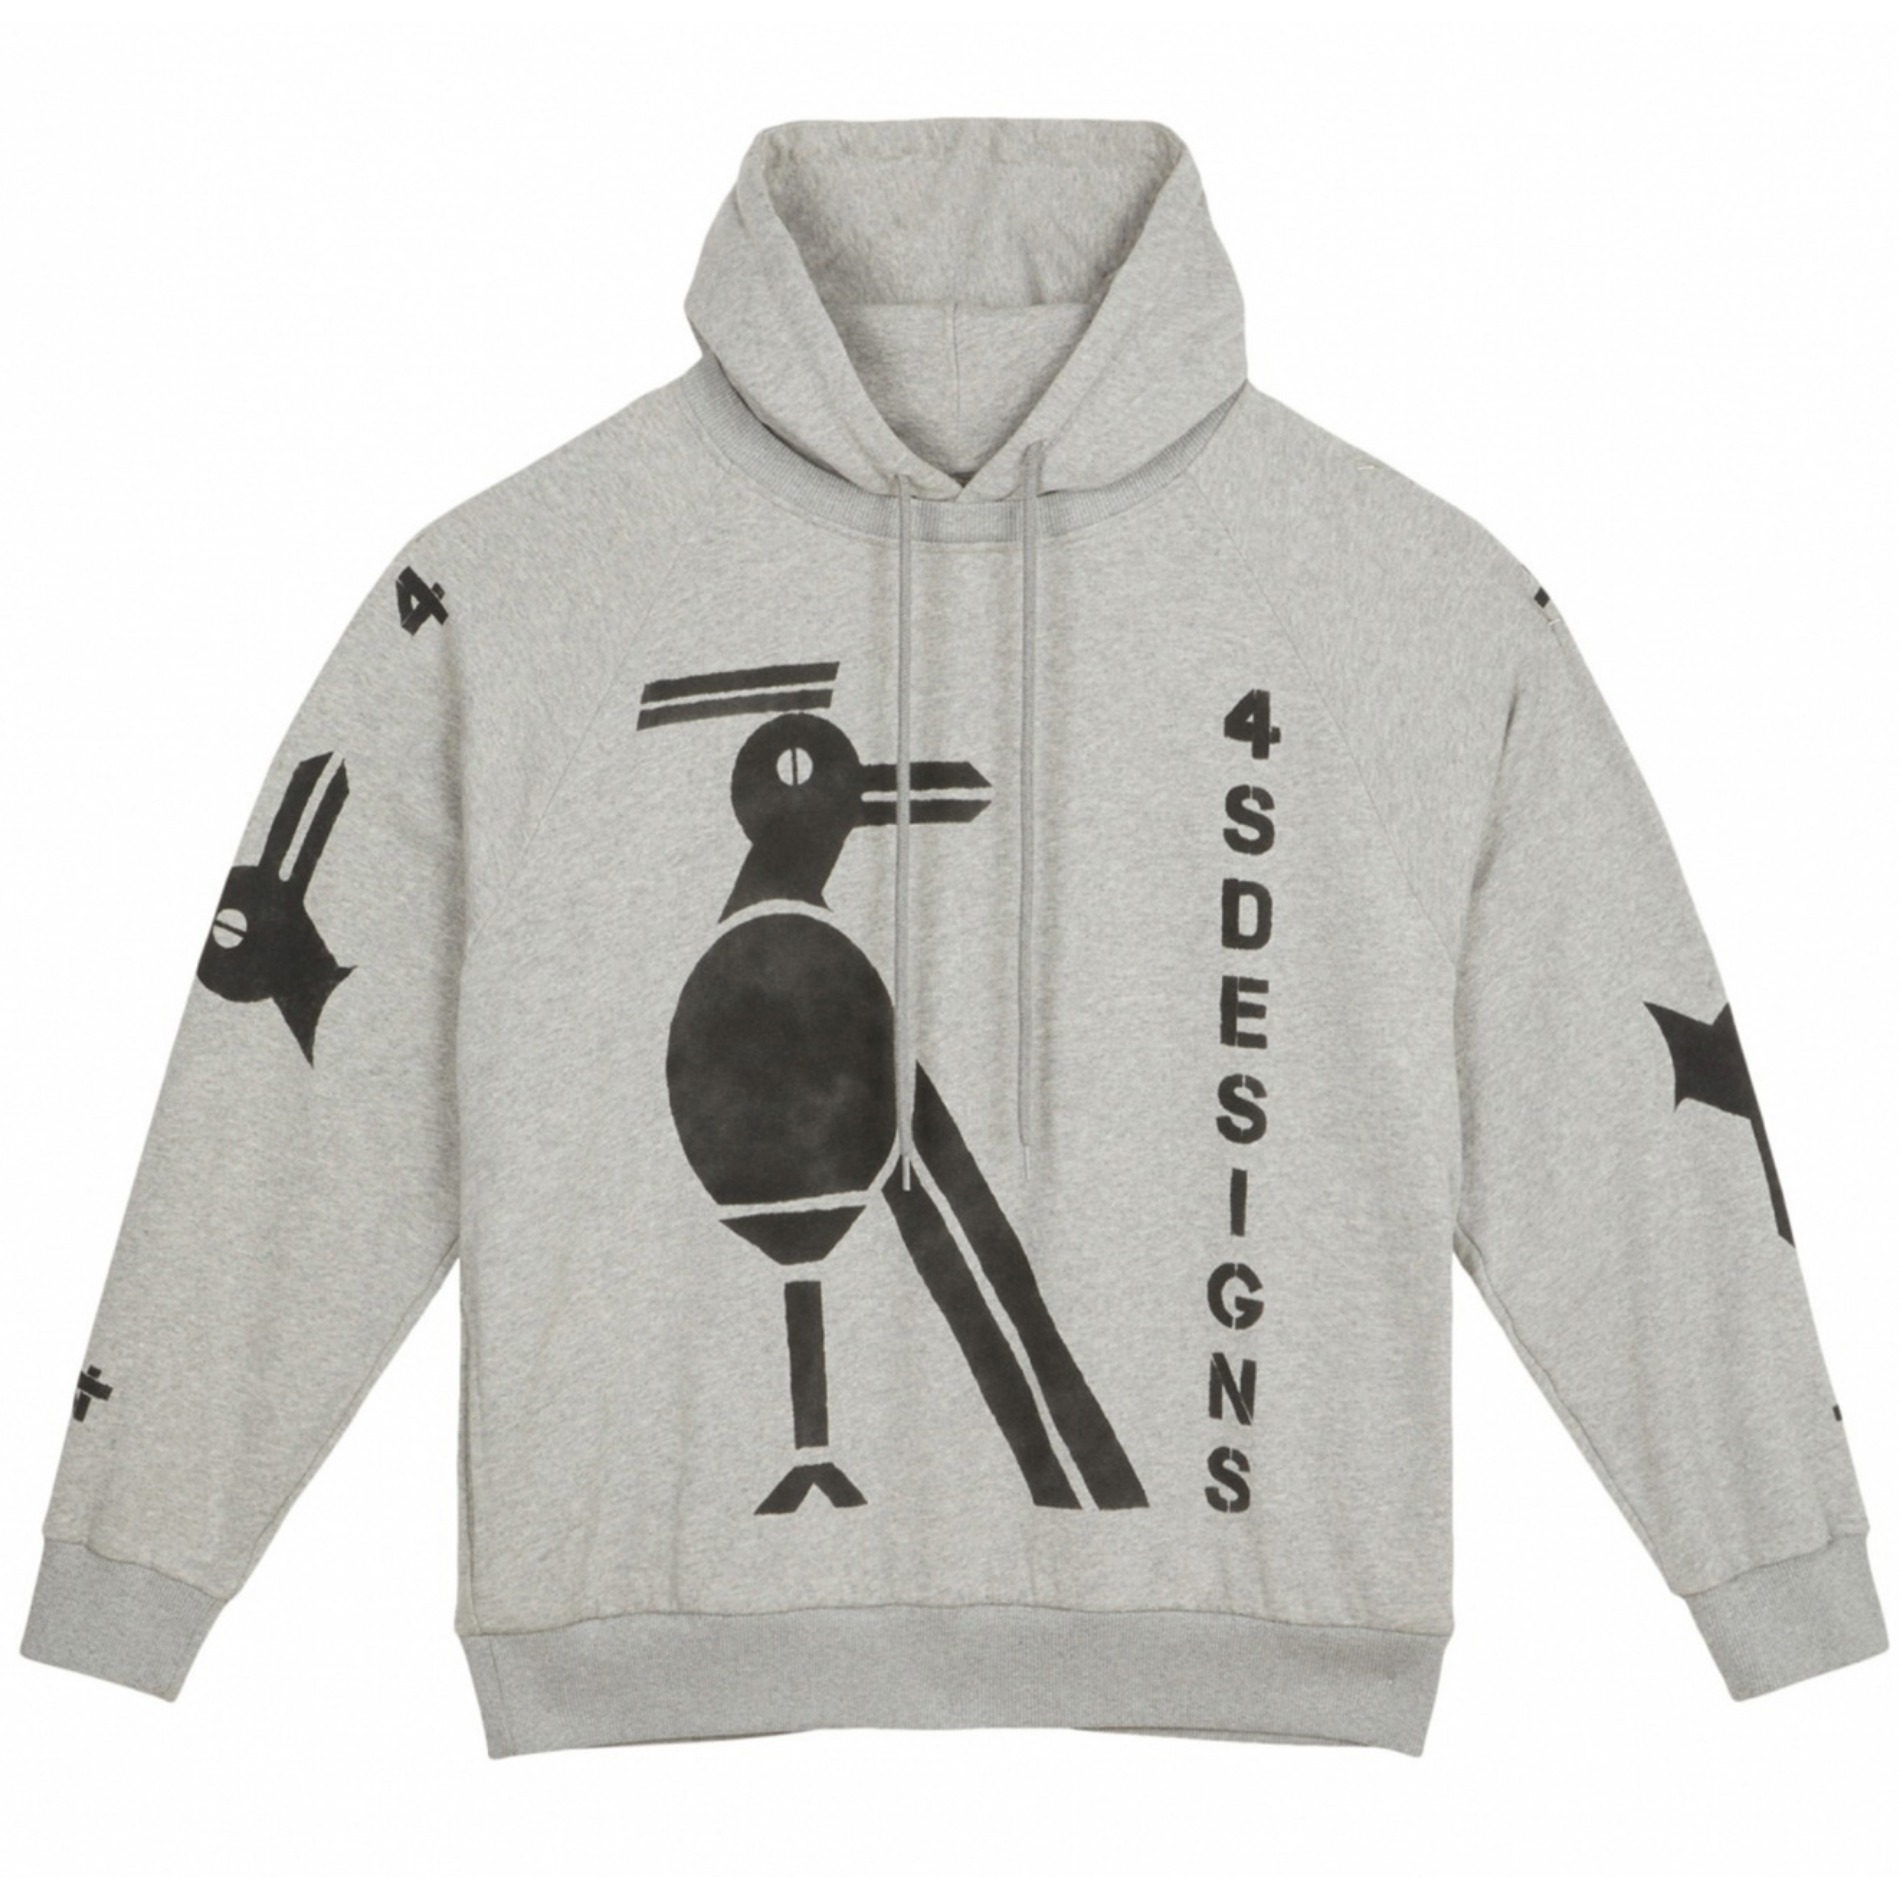 4SDESIGNS HOODIE IN GREY FRENCH TERRY